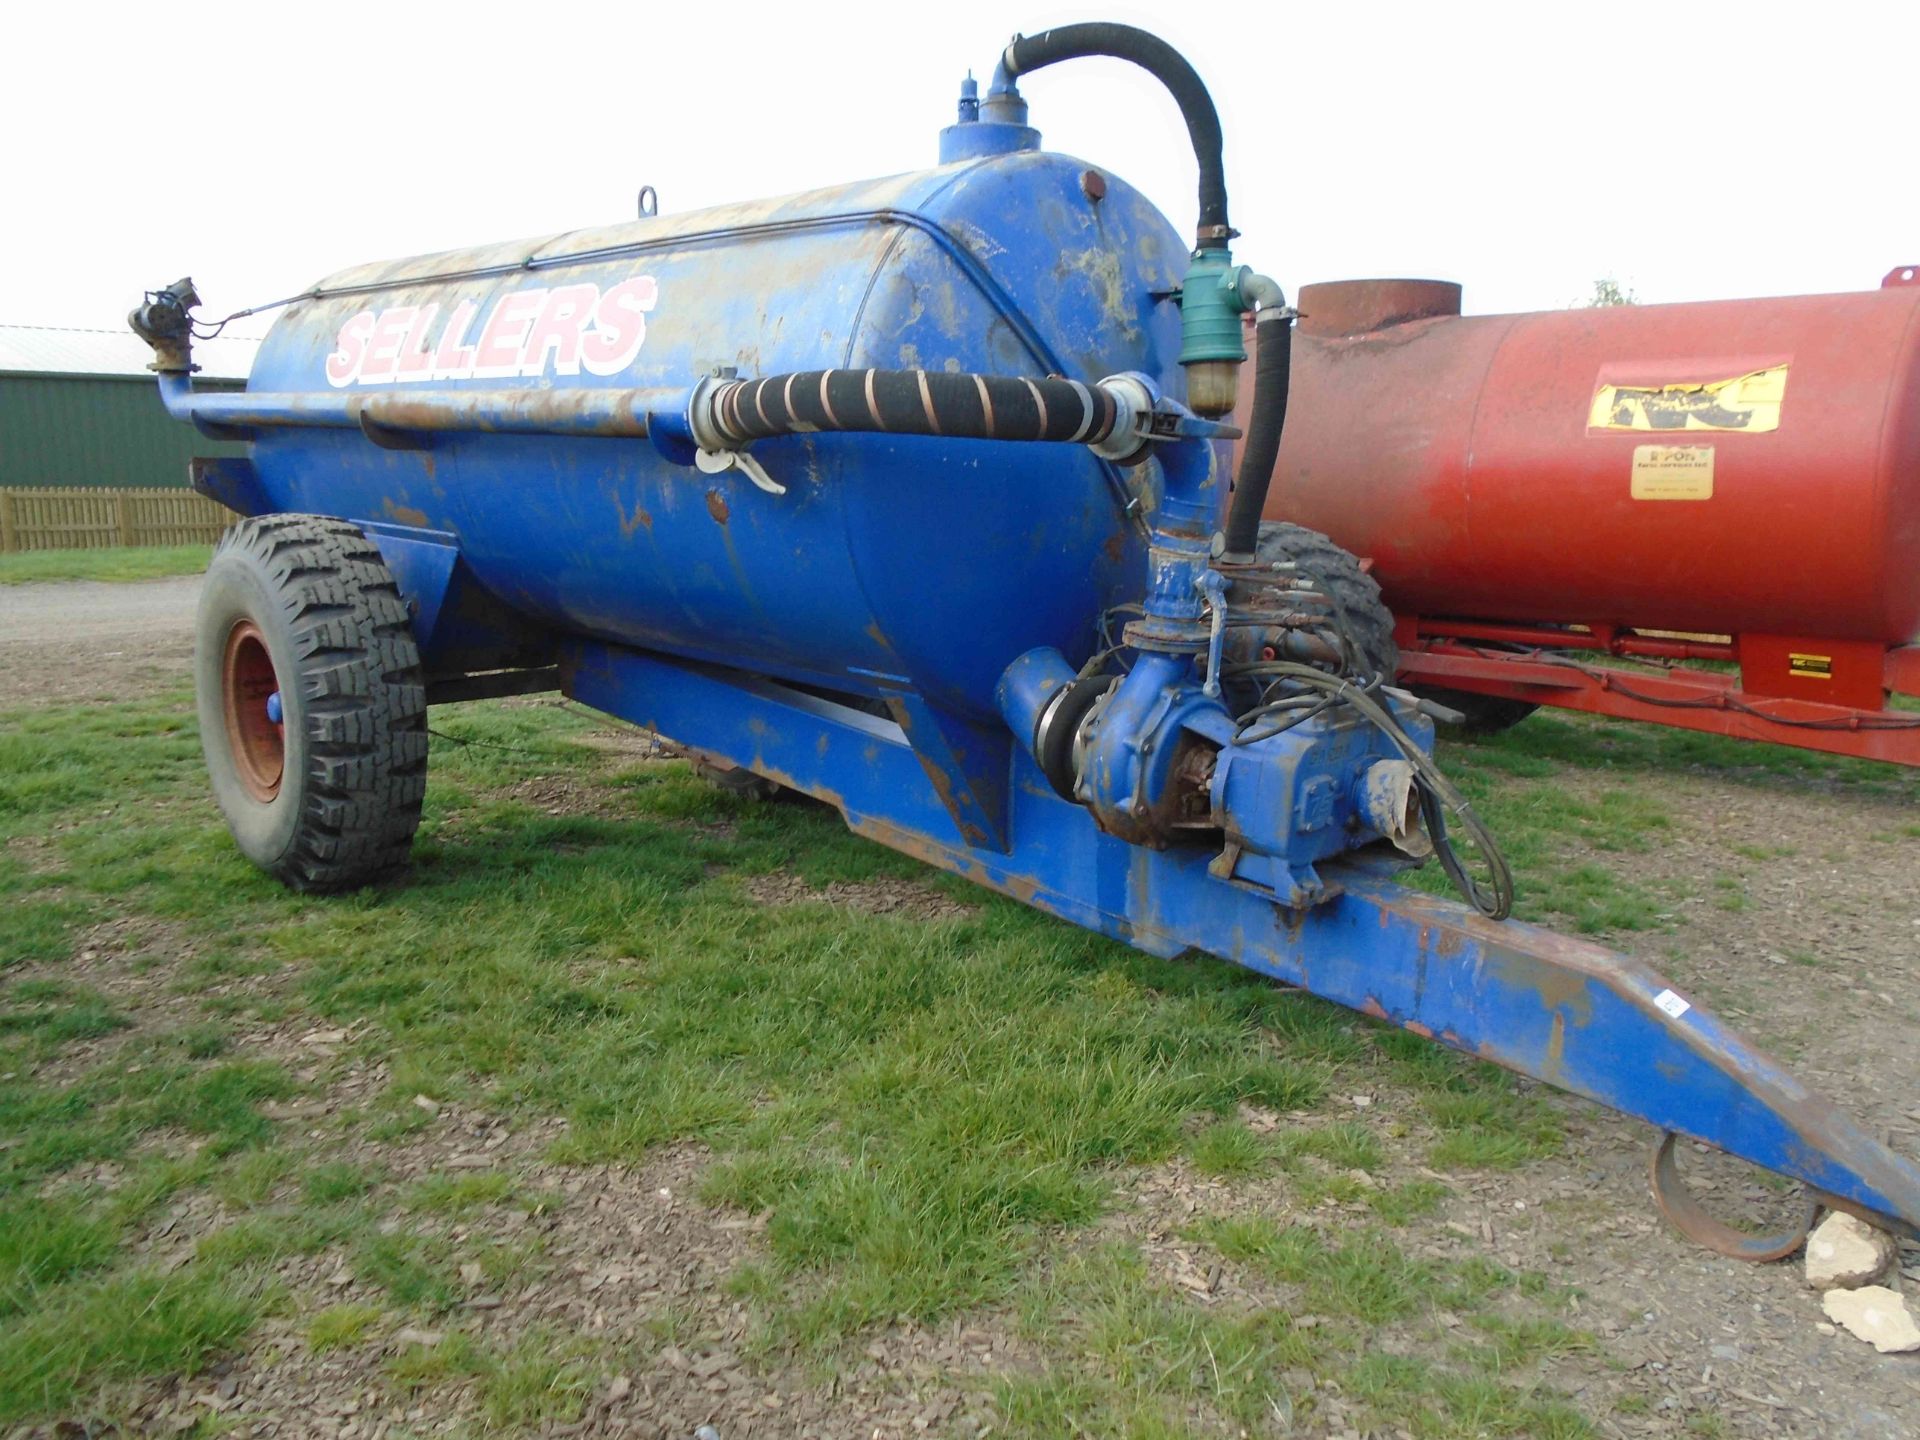 1500 gallon slurry tanker, been used for water bowser